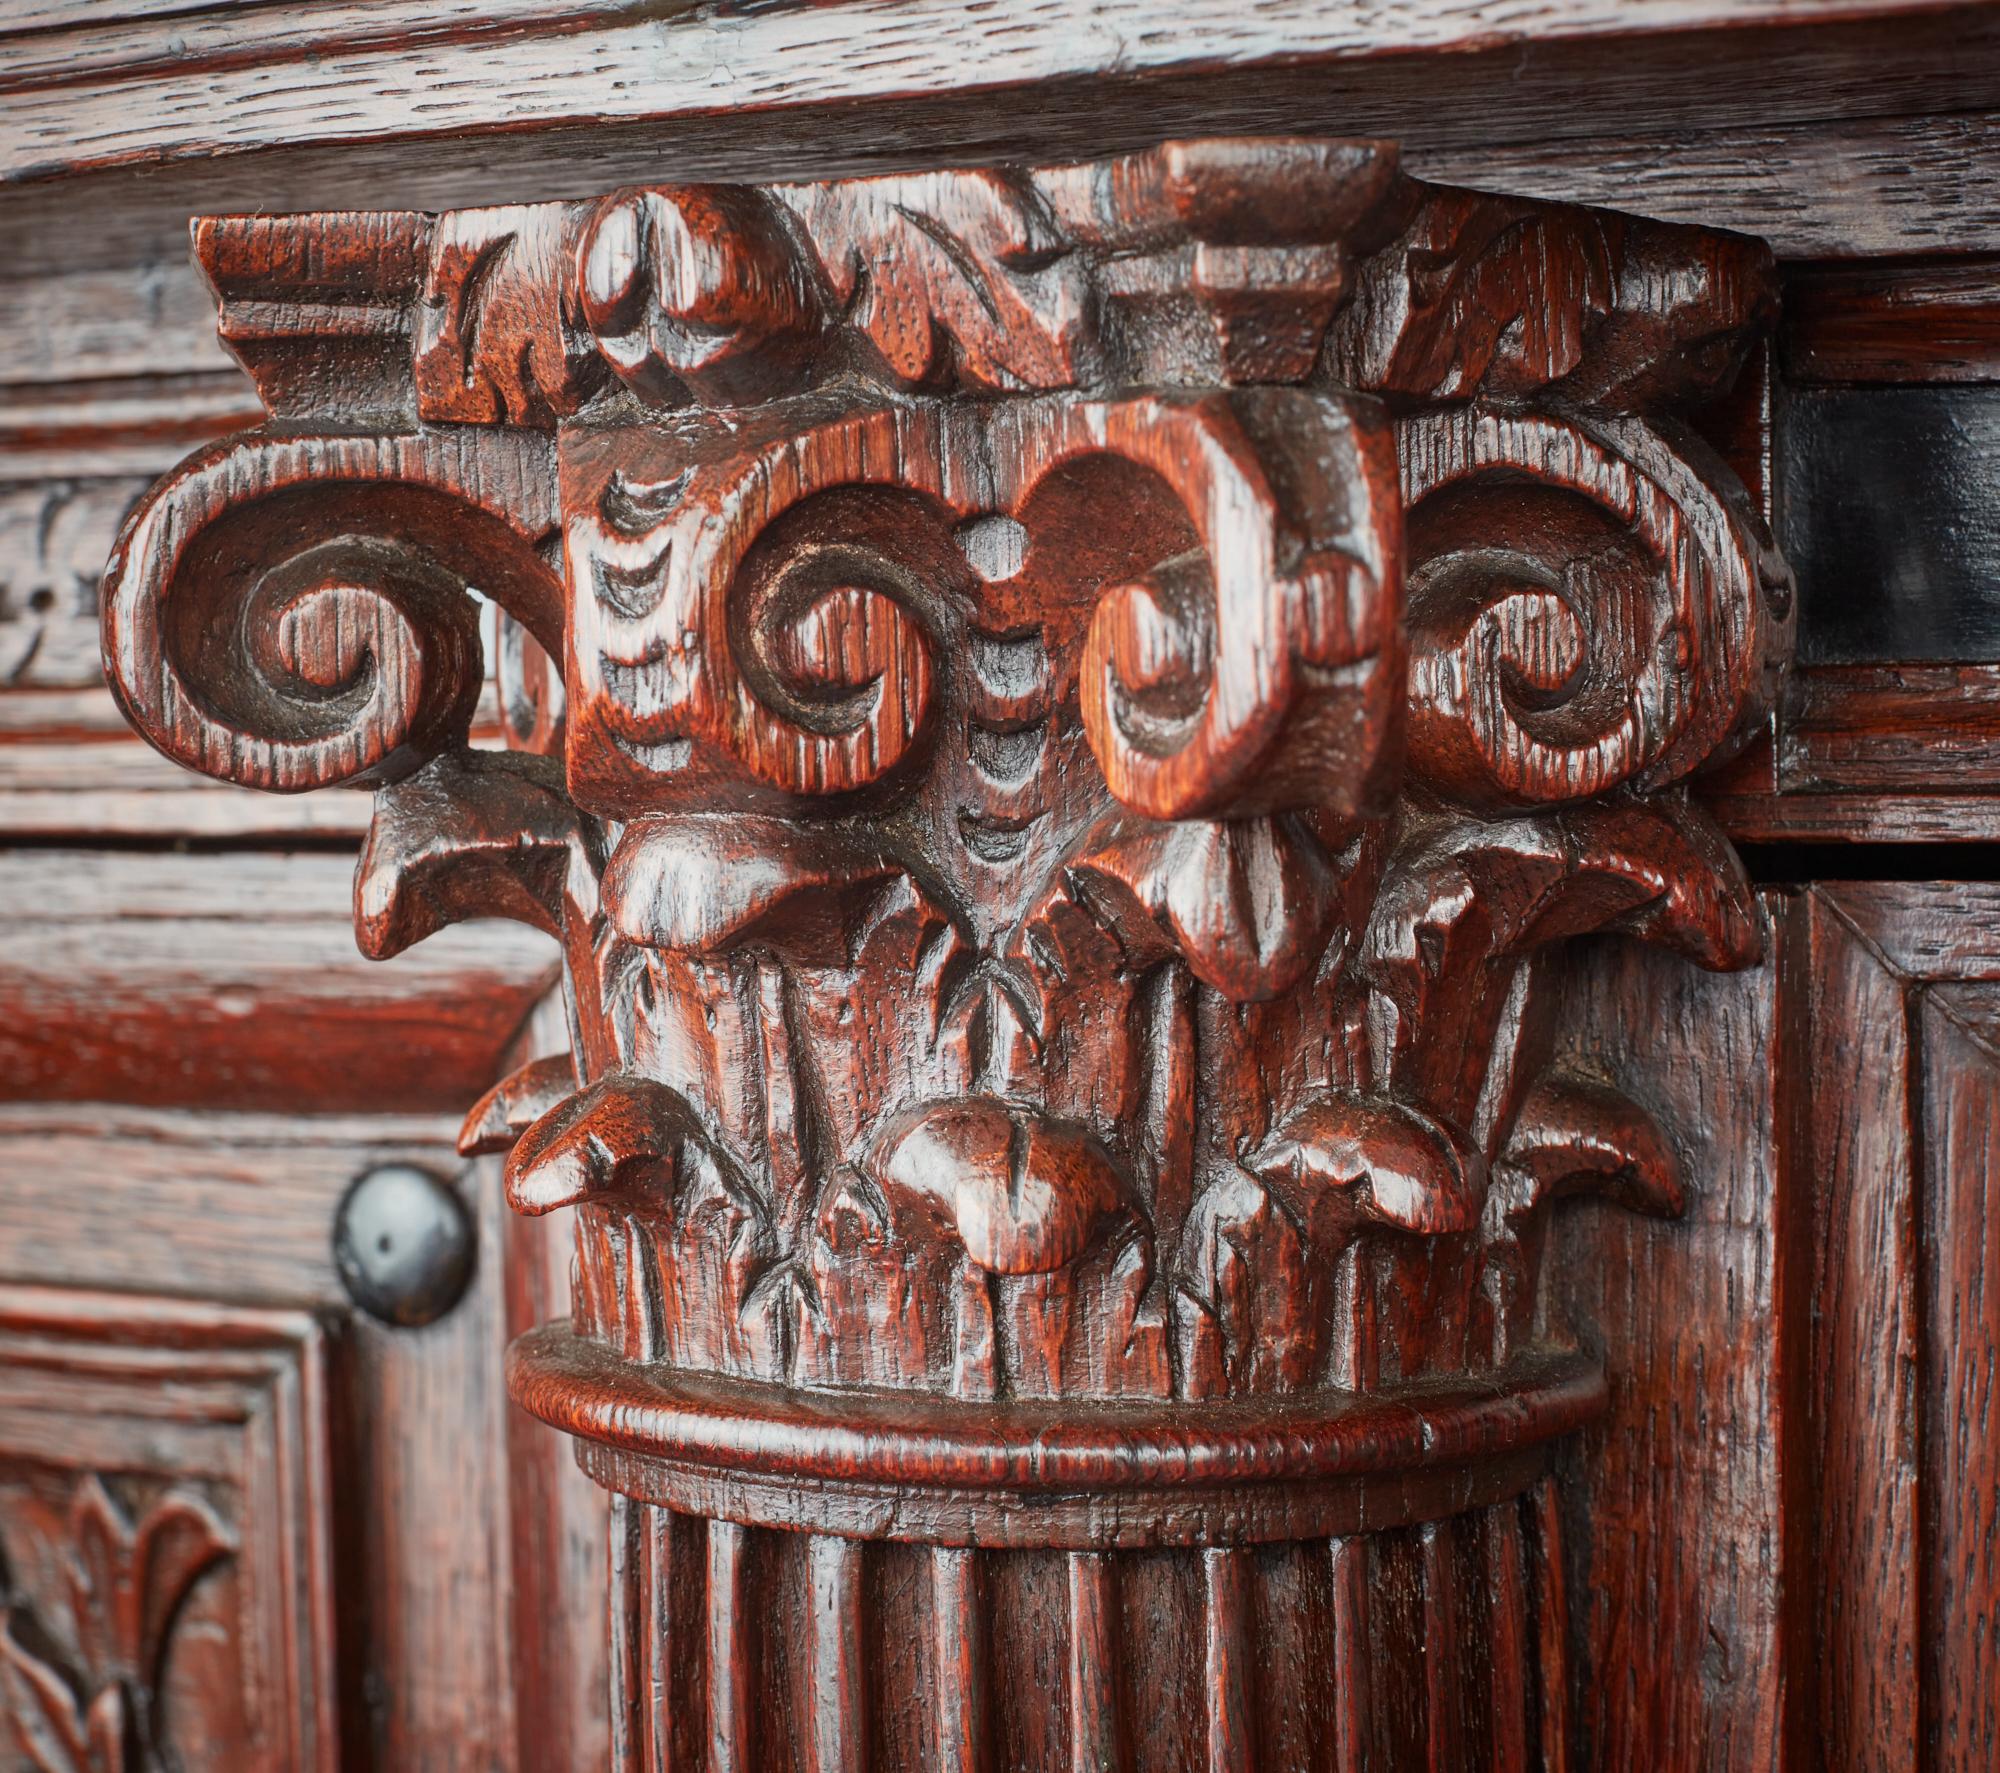 A rare 17th century Dutch Renaissance Cupboard, also known as a 'Keeftkast.' This timeless masterpiece embodies the essence of the Dutch Golden Age, meticulously crafted to captivate both the eye and soul.

Crafted during a period of unrivalled